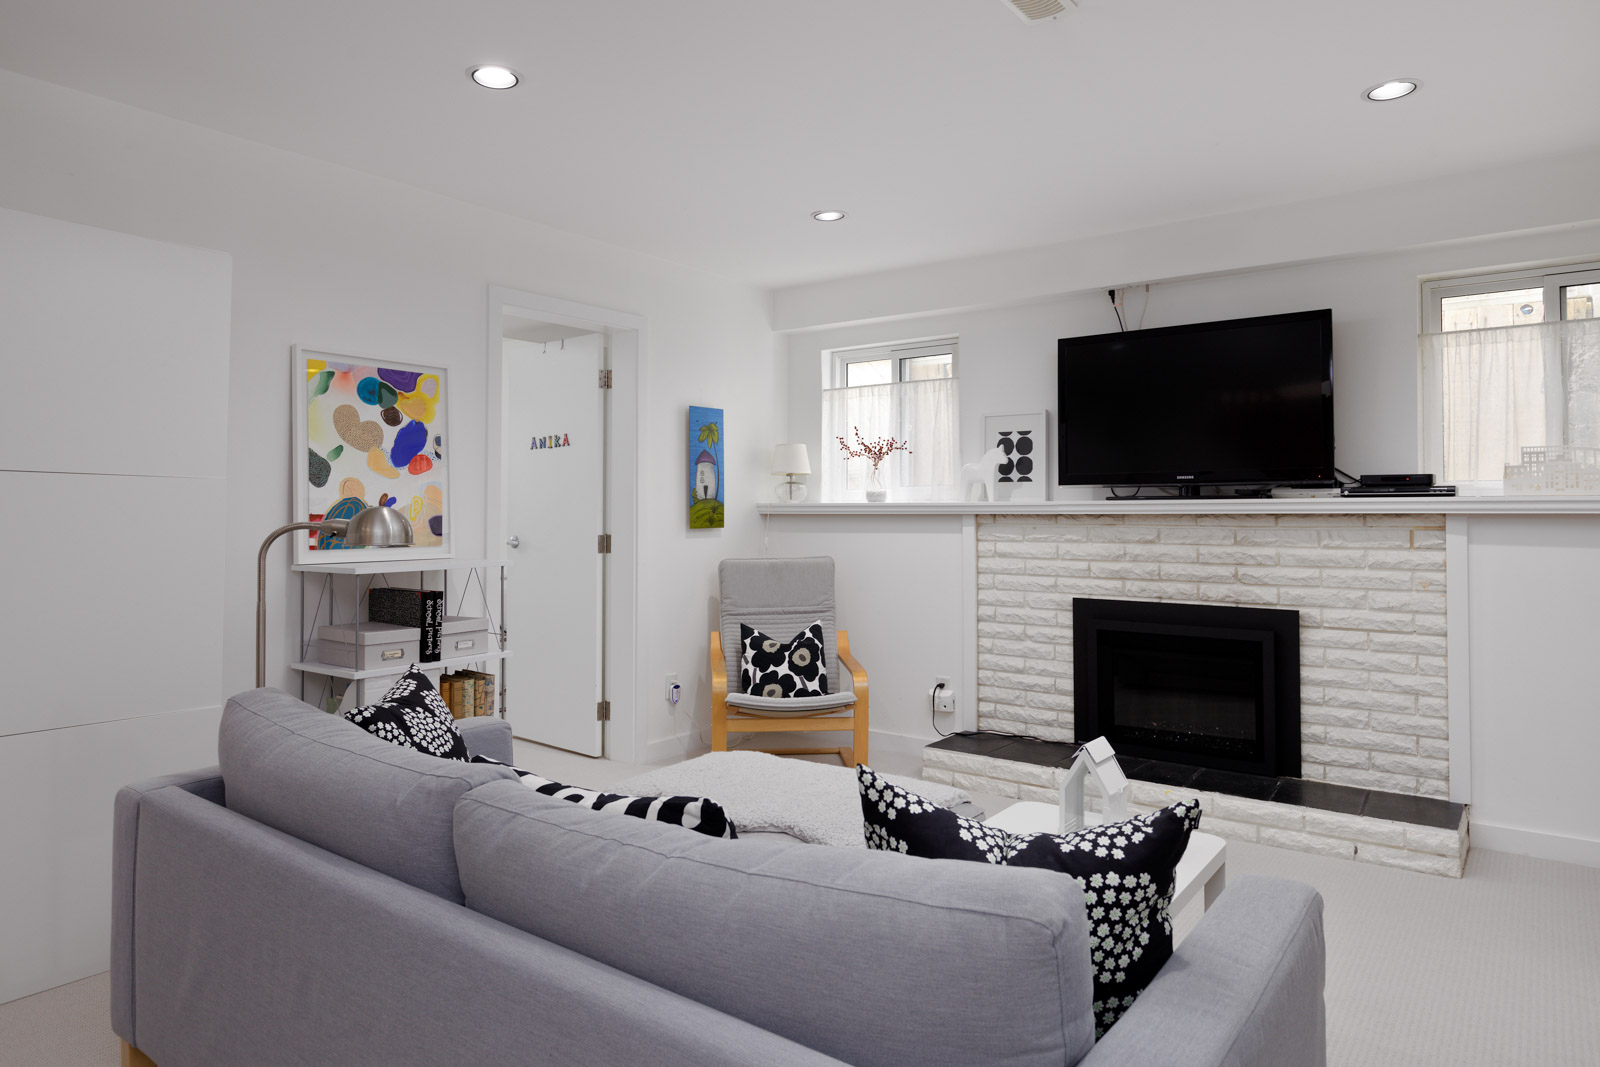 lower living room area with fireplace and carpets, white walls and room